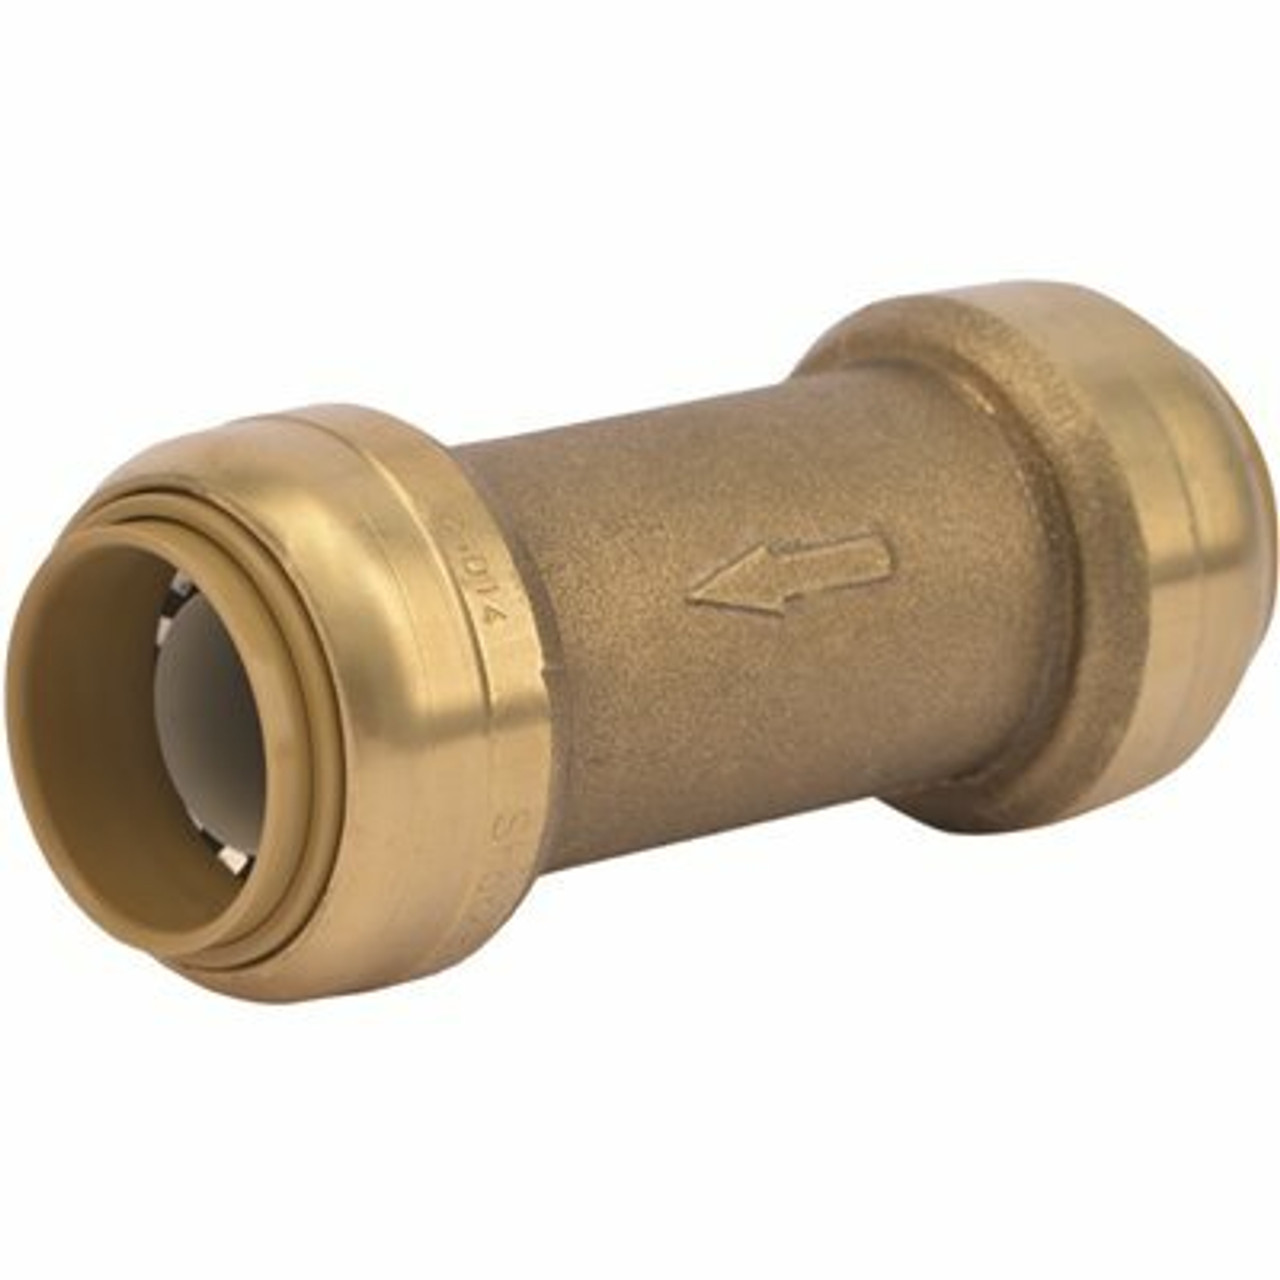 SharkBite 3/4 In. Push-To-Connect Brass Check Valve